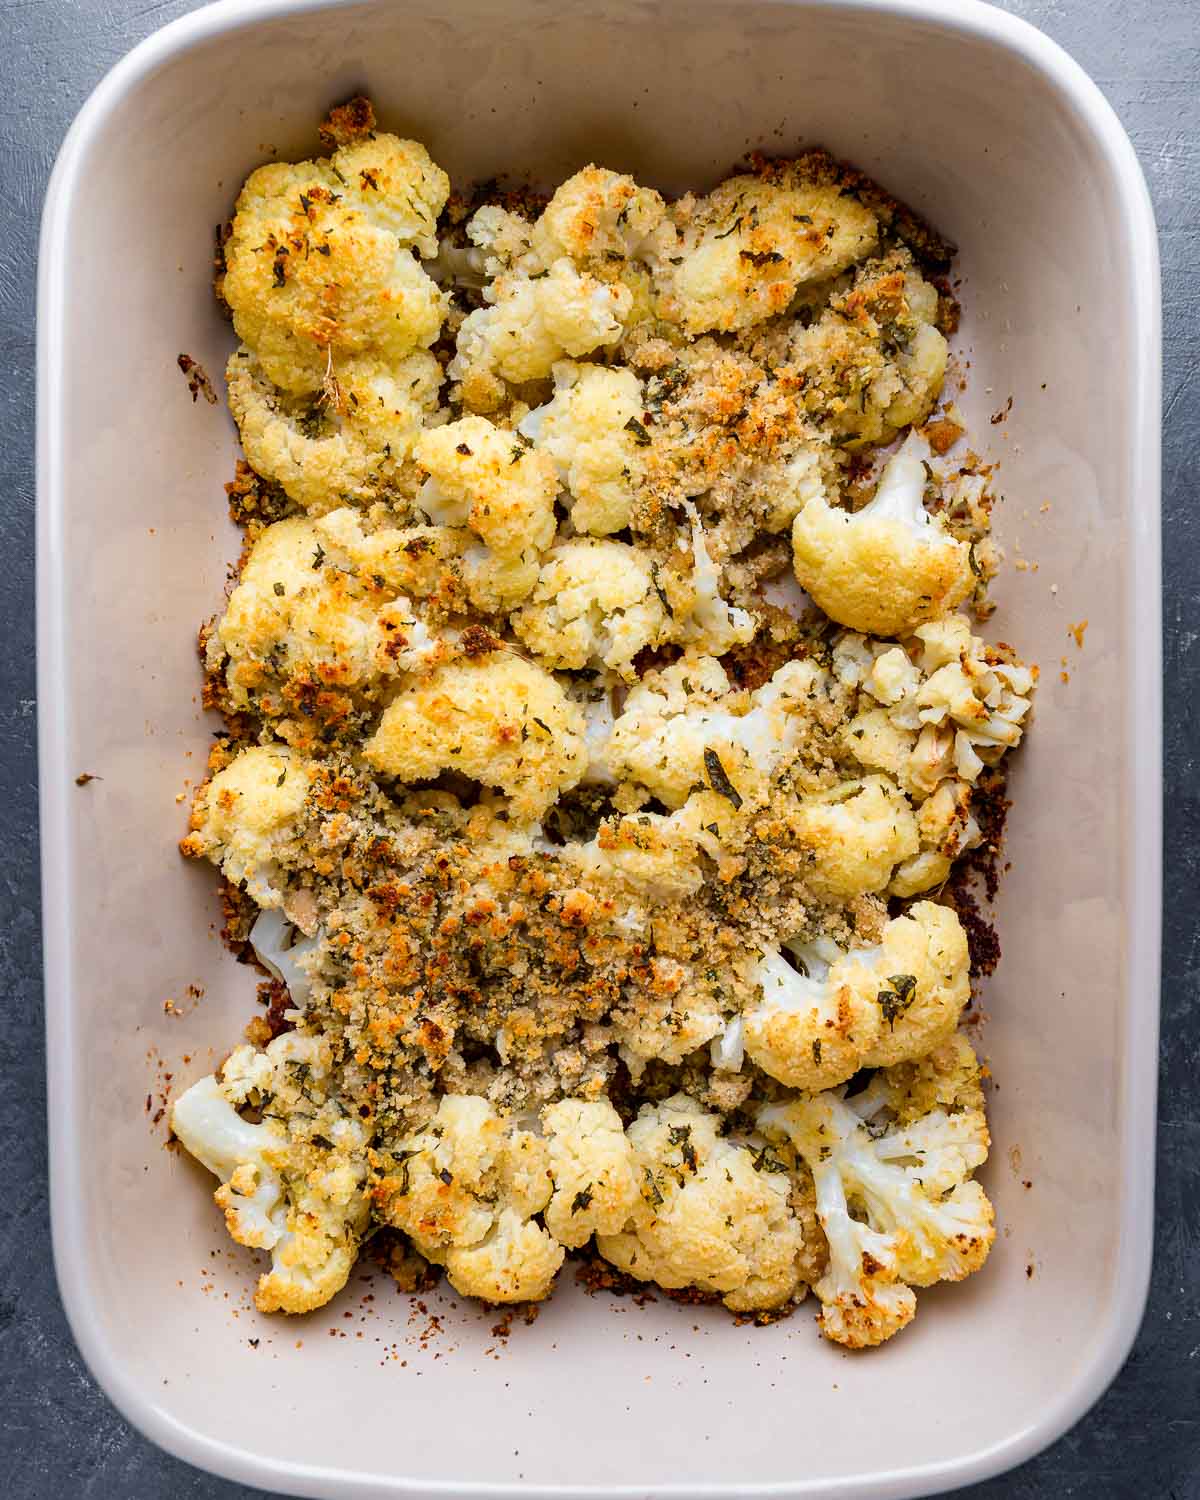 Baked cauliflower with cheese and breadcrumbs in large baking dish.